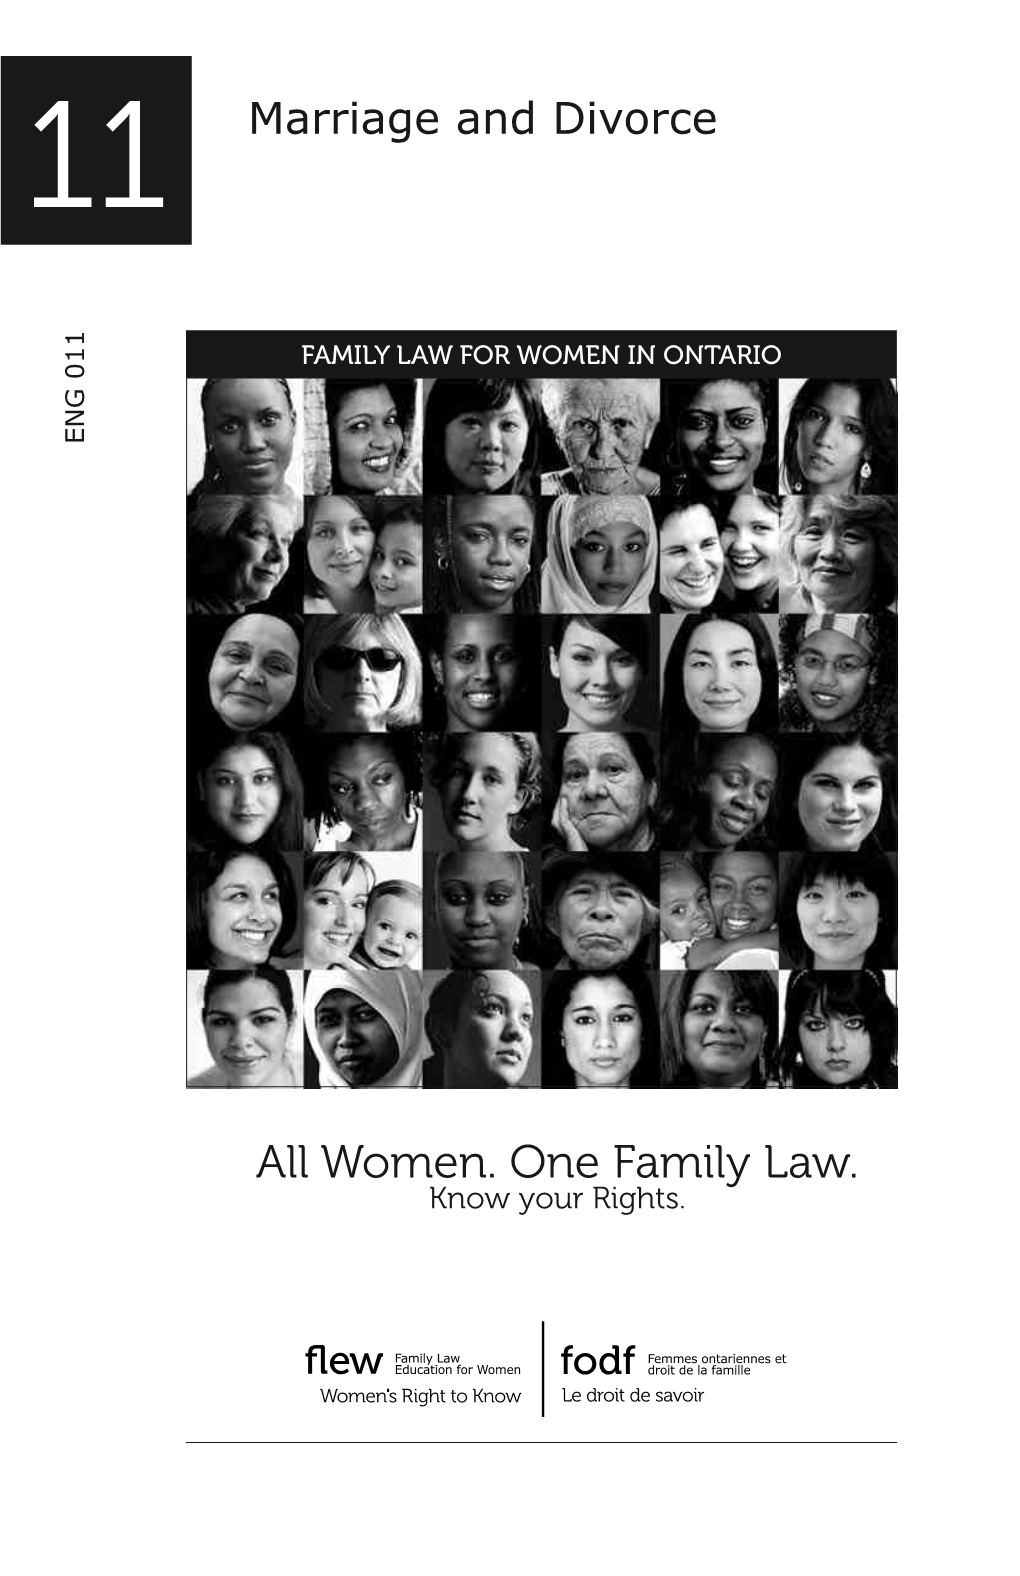 All Women. One Family Law. Know Your Rights